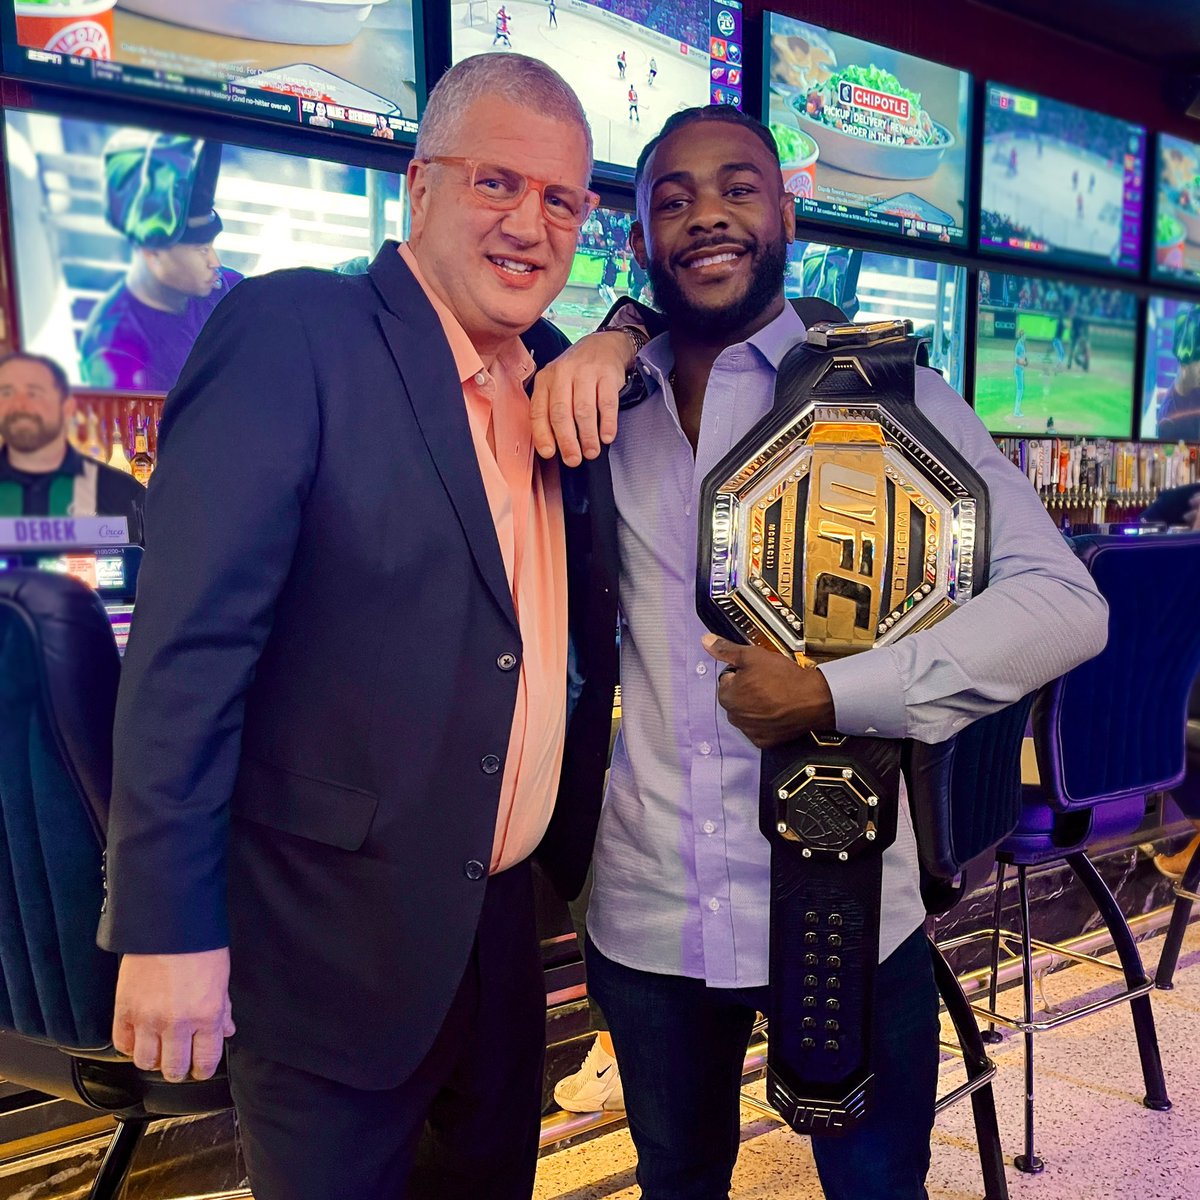 #AndStill 👏 Congratulations to Aljamain Sterling (@funkmasterMMA) on his #UFC280 victory, AND for holding the longest winstreak in bantamweight history with 8 straight! Hope to see you stop by #MEGABAR again soon to catch up w/ our CEO/owner @derekjstevens. 😎 #CircaLasVegas